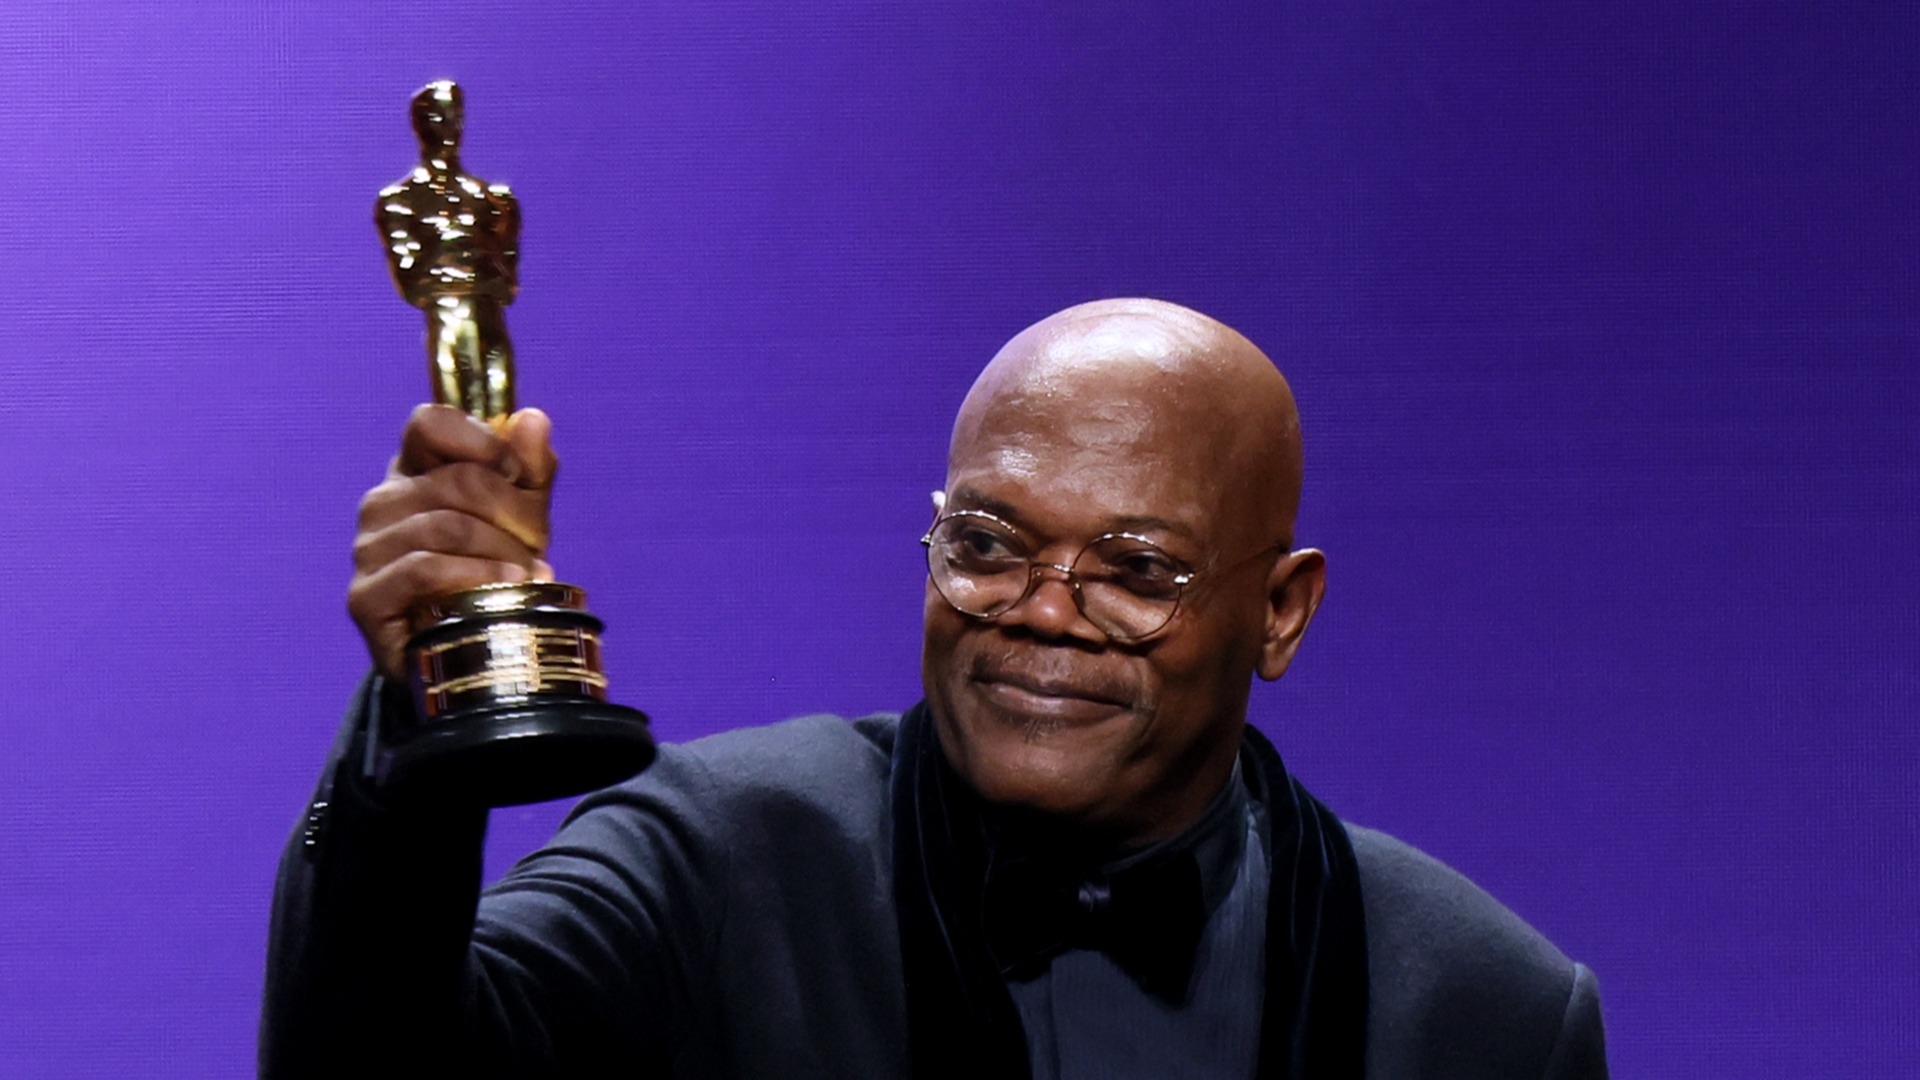 Samuel L. Jackson would “rather be Nick Fury” than chase an Oscar